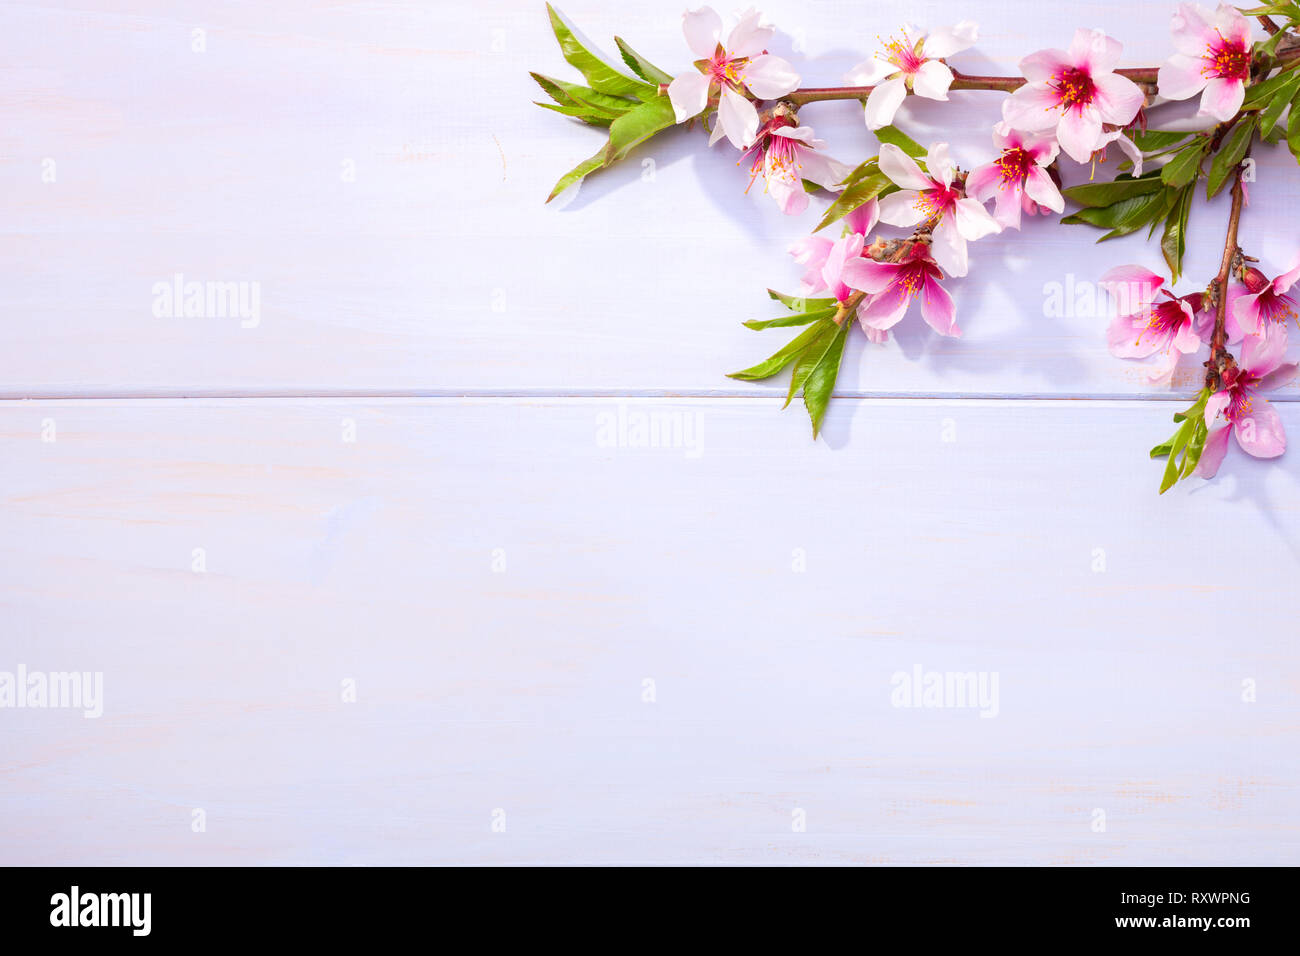 Flowering branches of Almond on a light lilac wooden table. Stock Photo